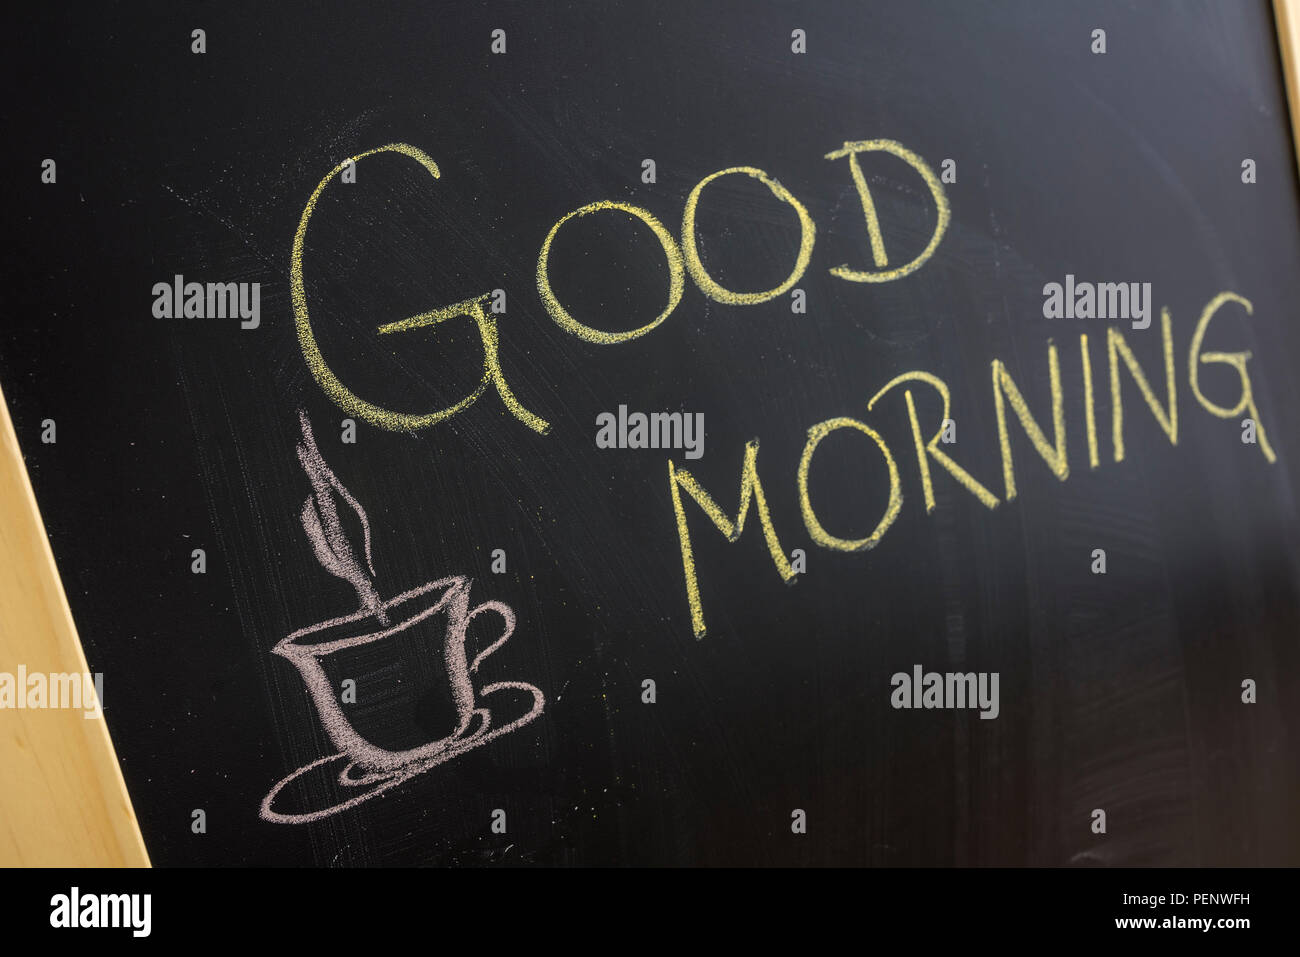 Good morning message with coffee cup written on blackboard. Stock Photo